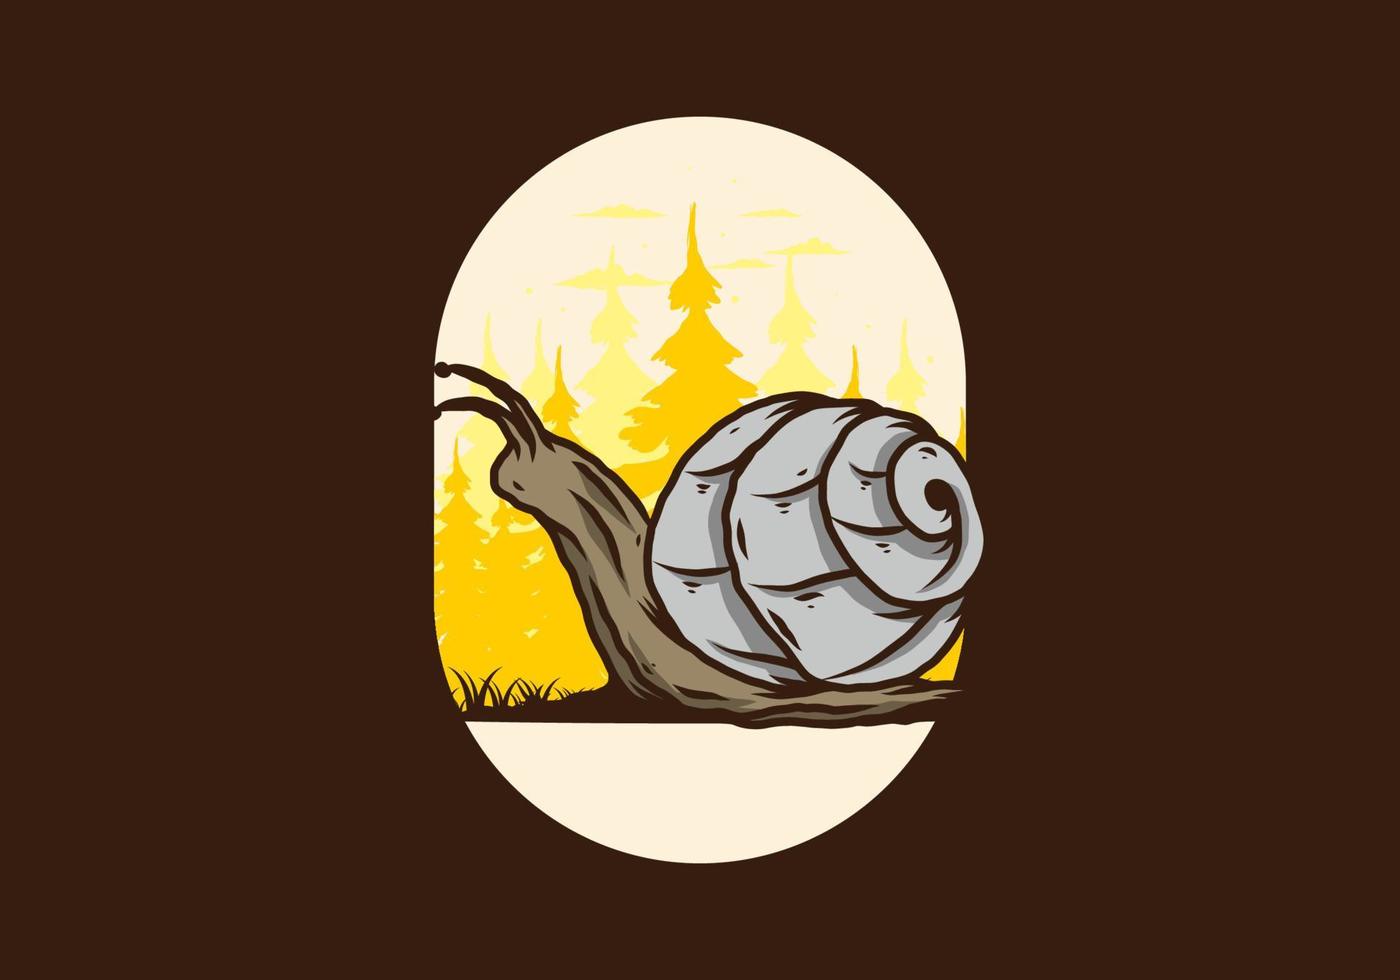 Snail creeping in the forest illustration vector